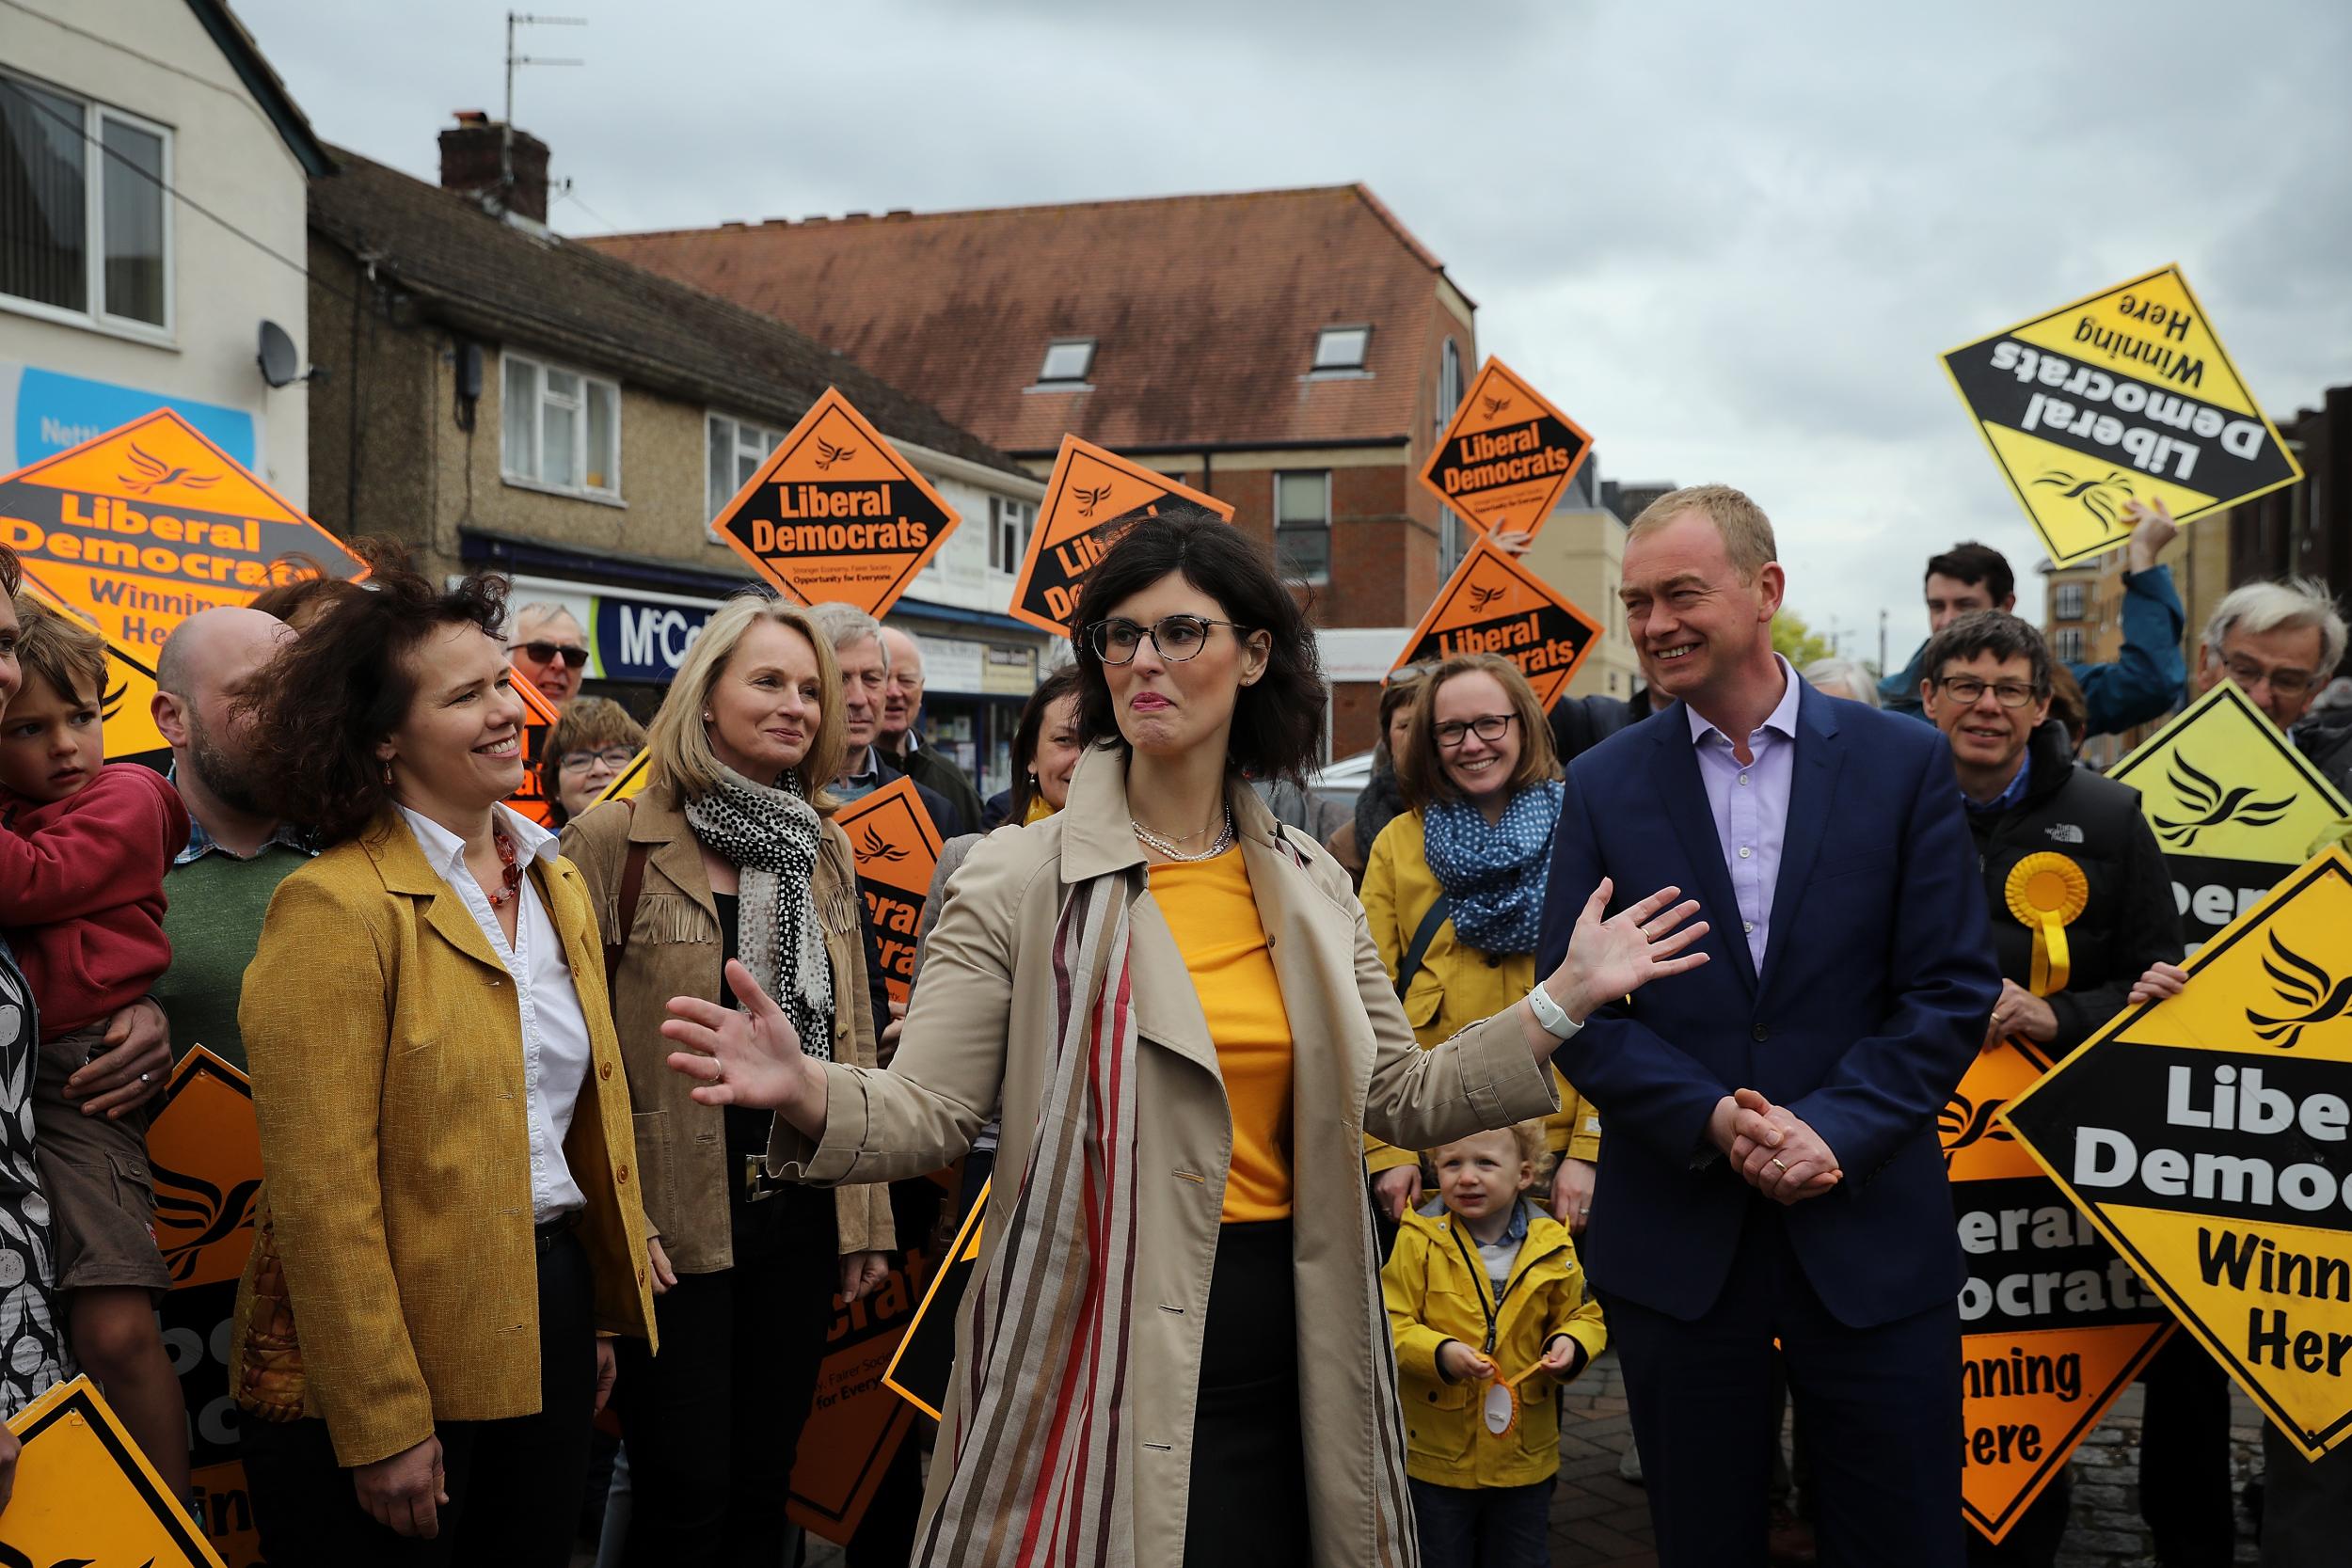 Lib Dem leader Tim Farron is yet to attract significant new voters, but he has a chance to during the TV debates